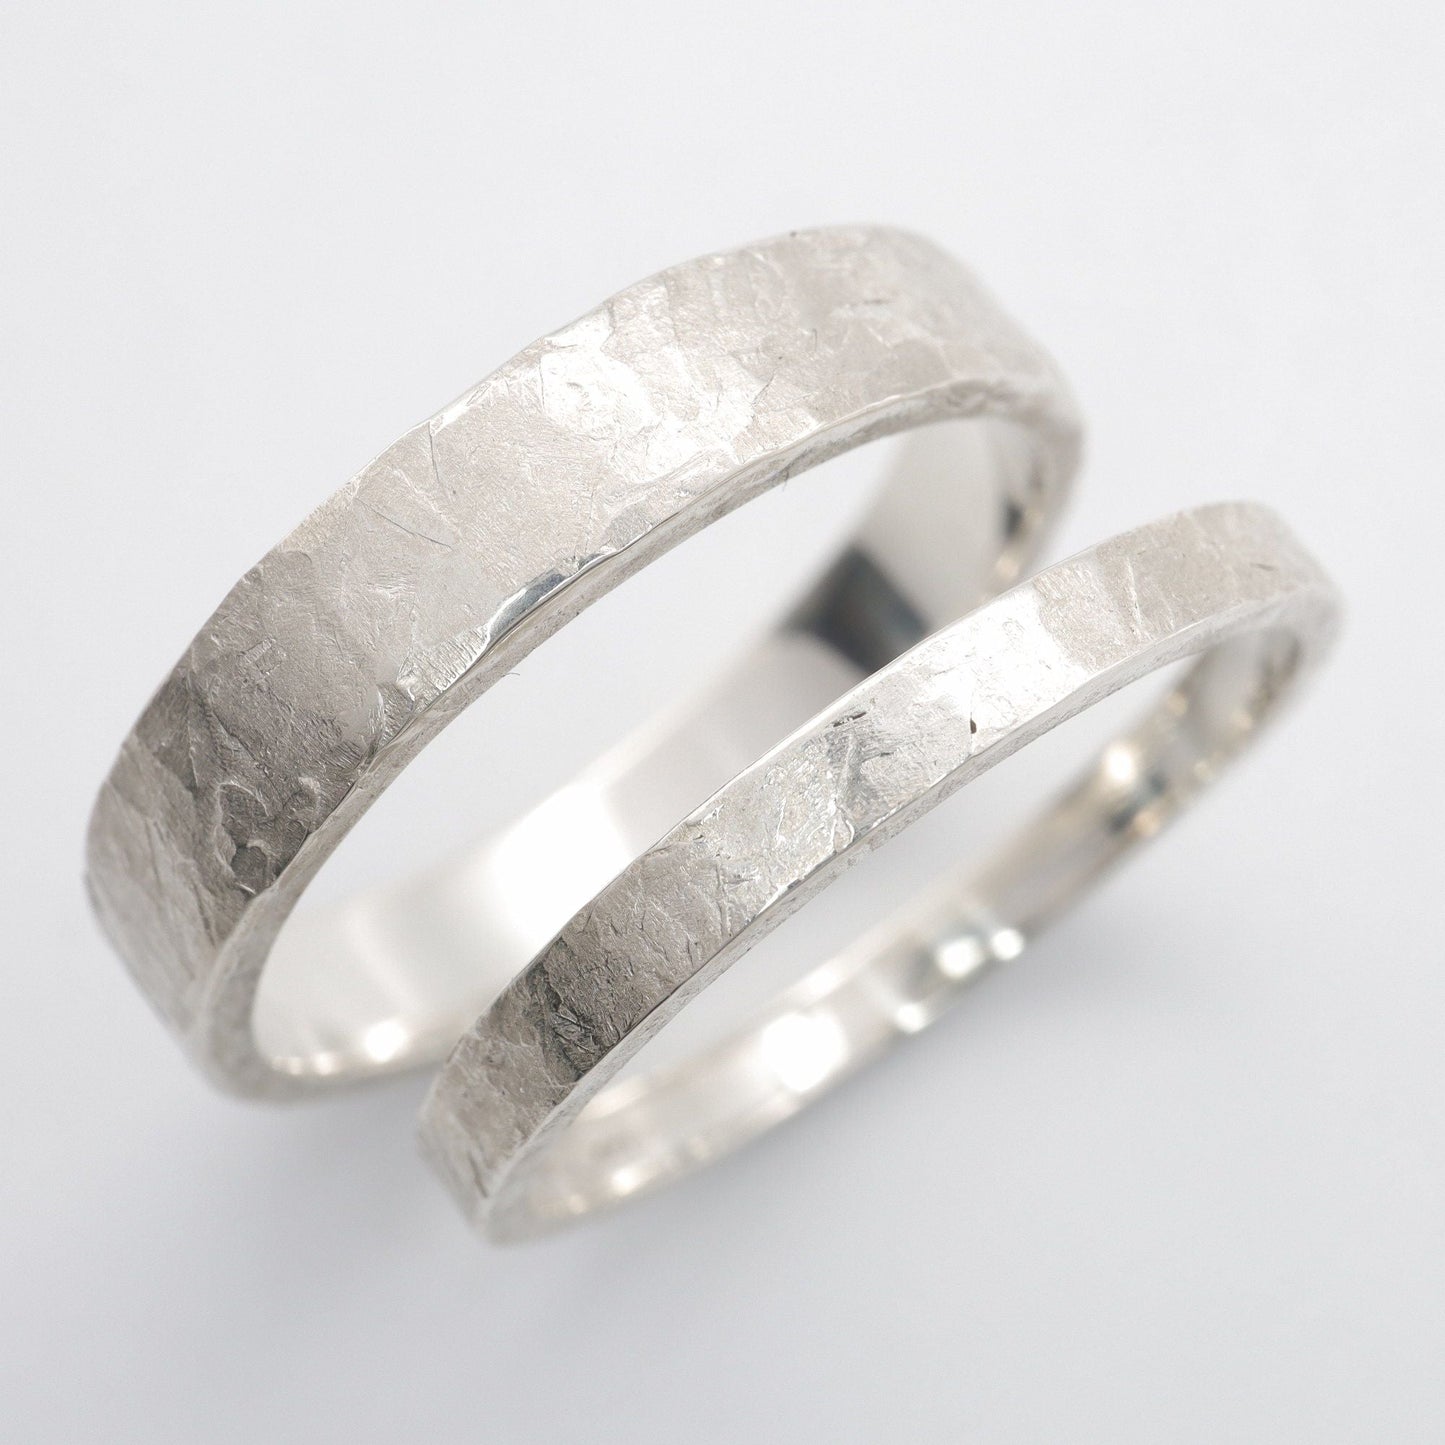 White gold matching wedding ring set - rustic flat hammered textured band - original men`s and women`s, Windermere design - 2mm and 4mm.